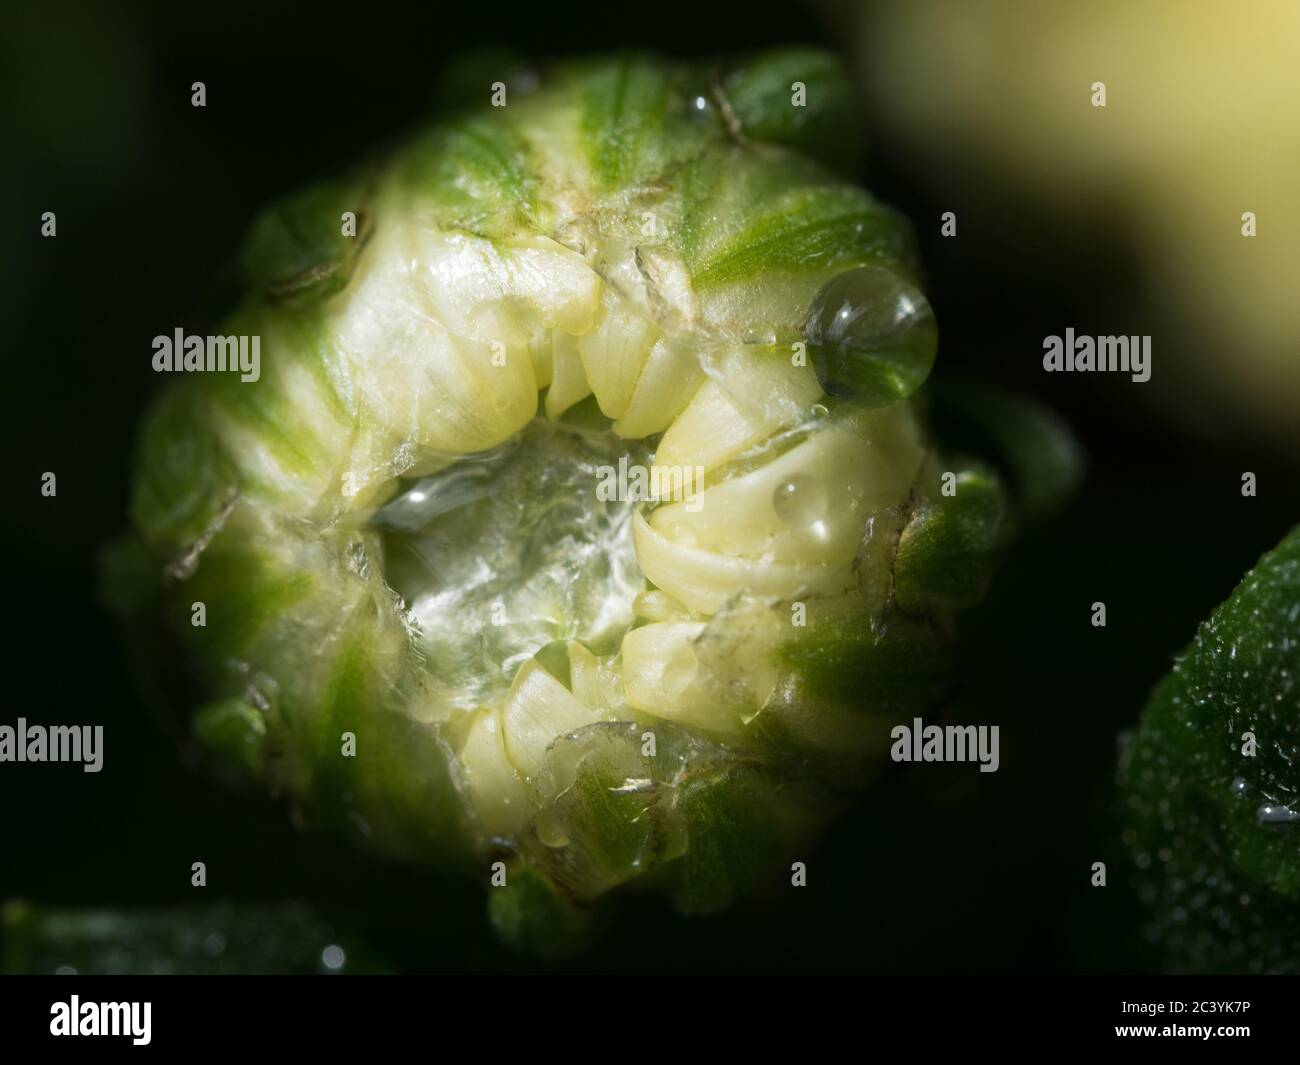 Water drops, Macro of a wet yellow and green Chrysanthemum flower bud blooming and water droplets, dark blurred background, Australian coastal garden Stock Photo